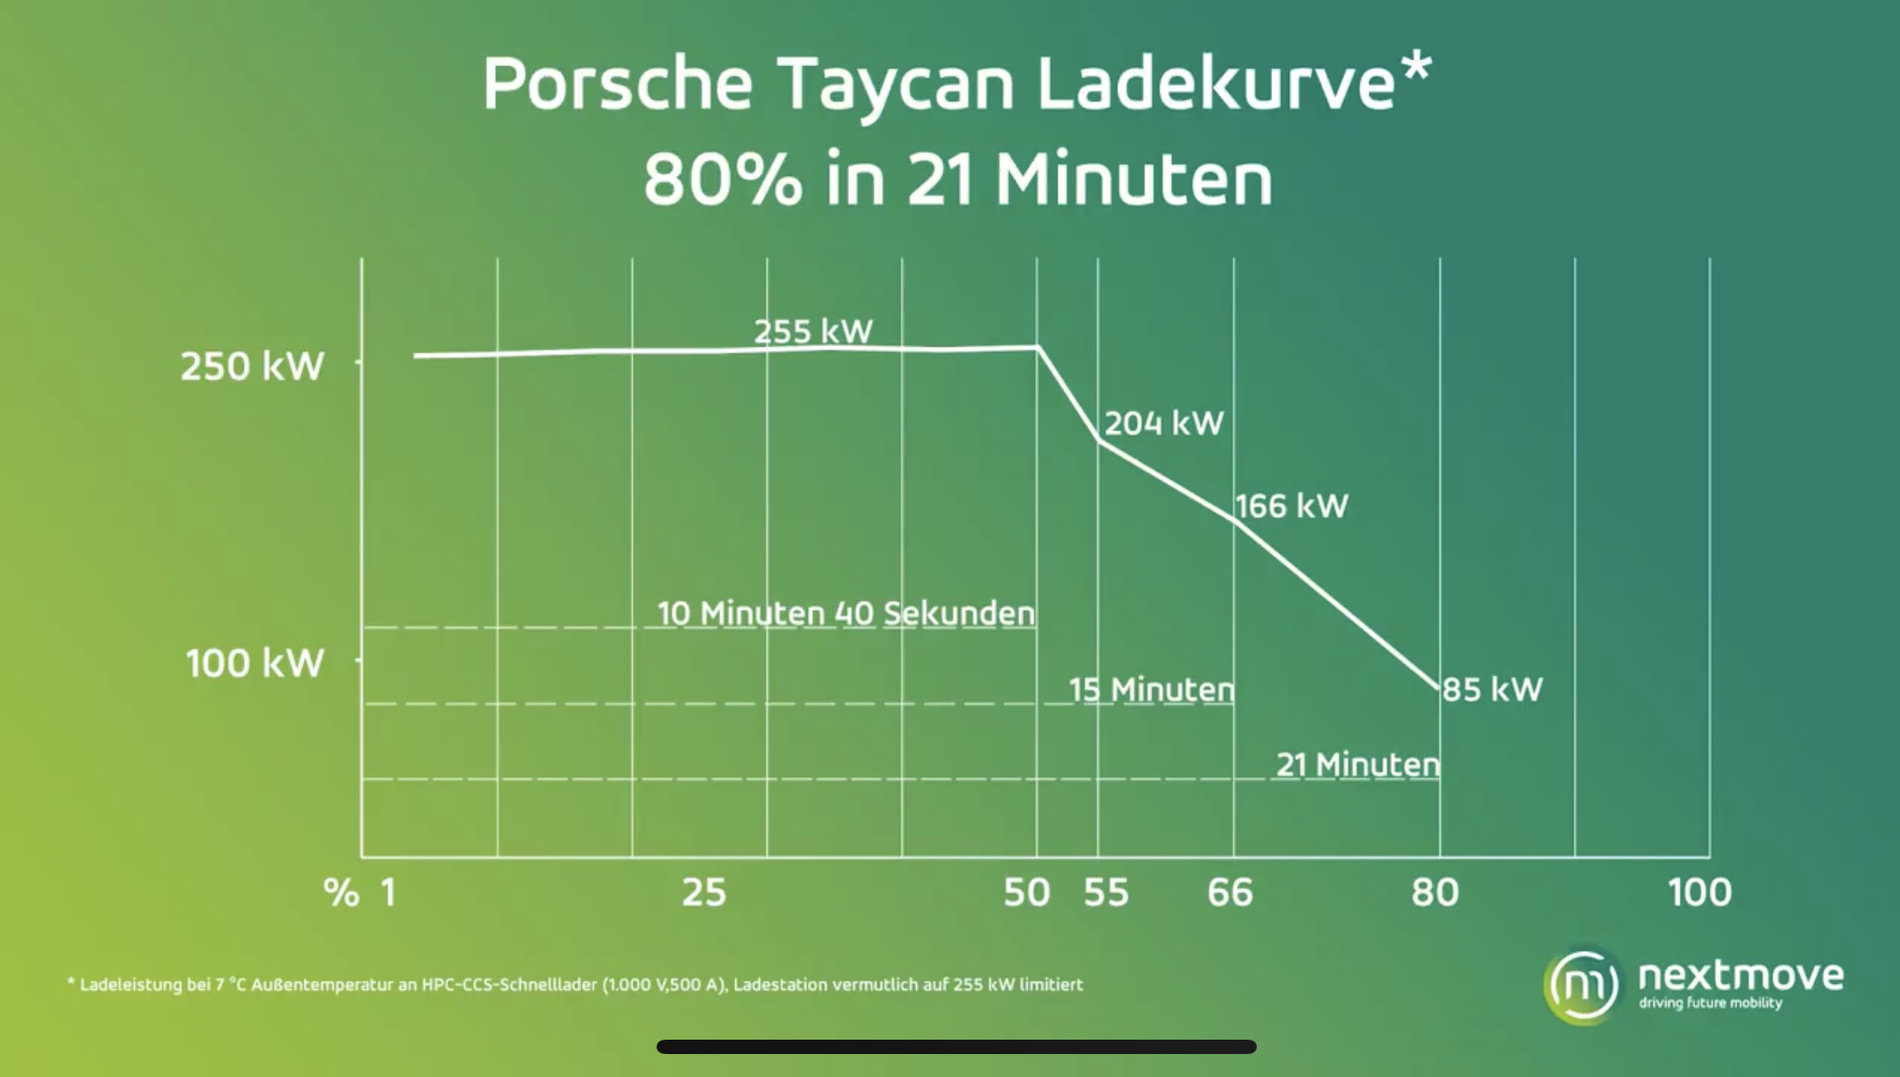 Porsche Taycan Owner Discusses Taycan Range, Battery Longevity, Charging and Related Concerns 271EB029-8AFF-40B2-B044-CC361A90B997